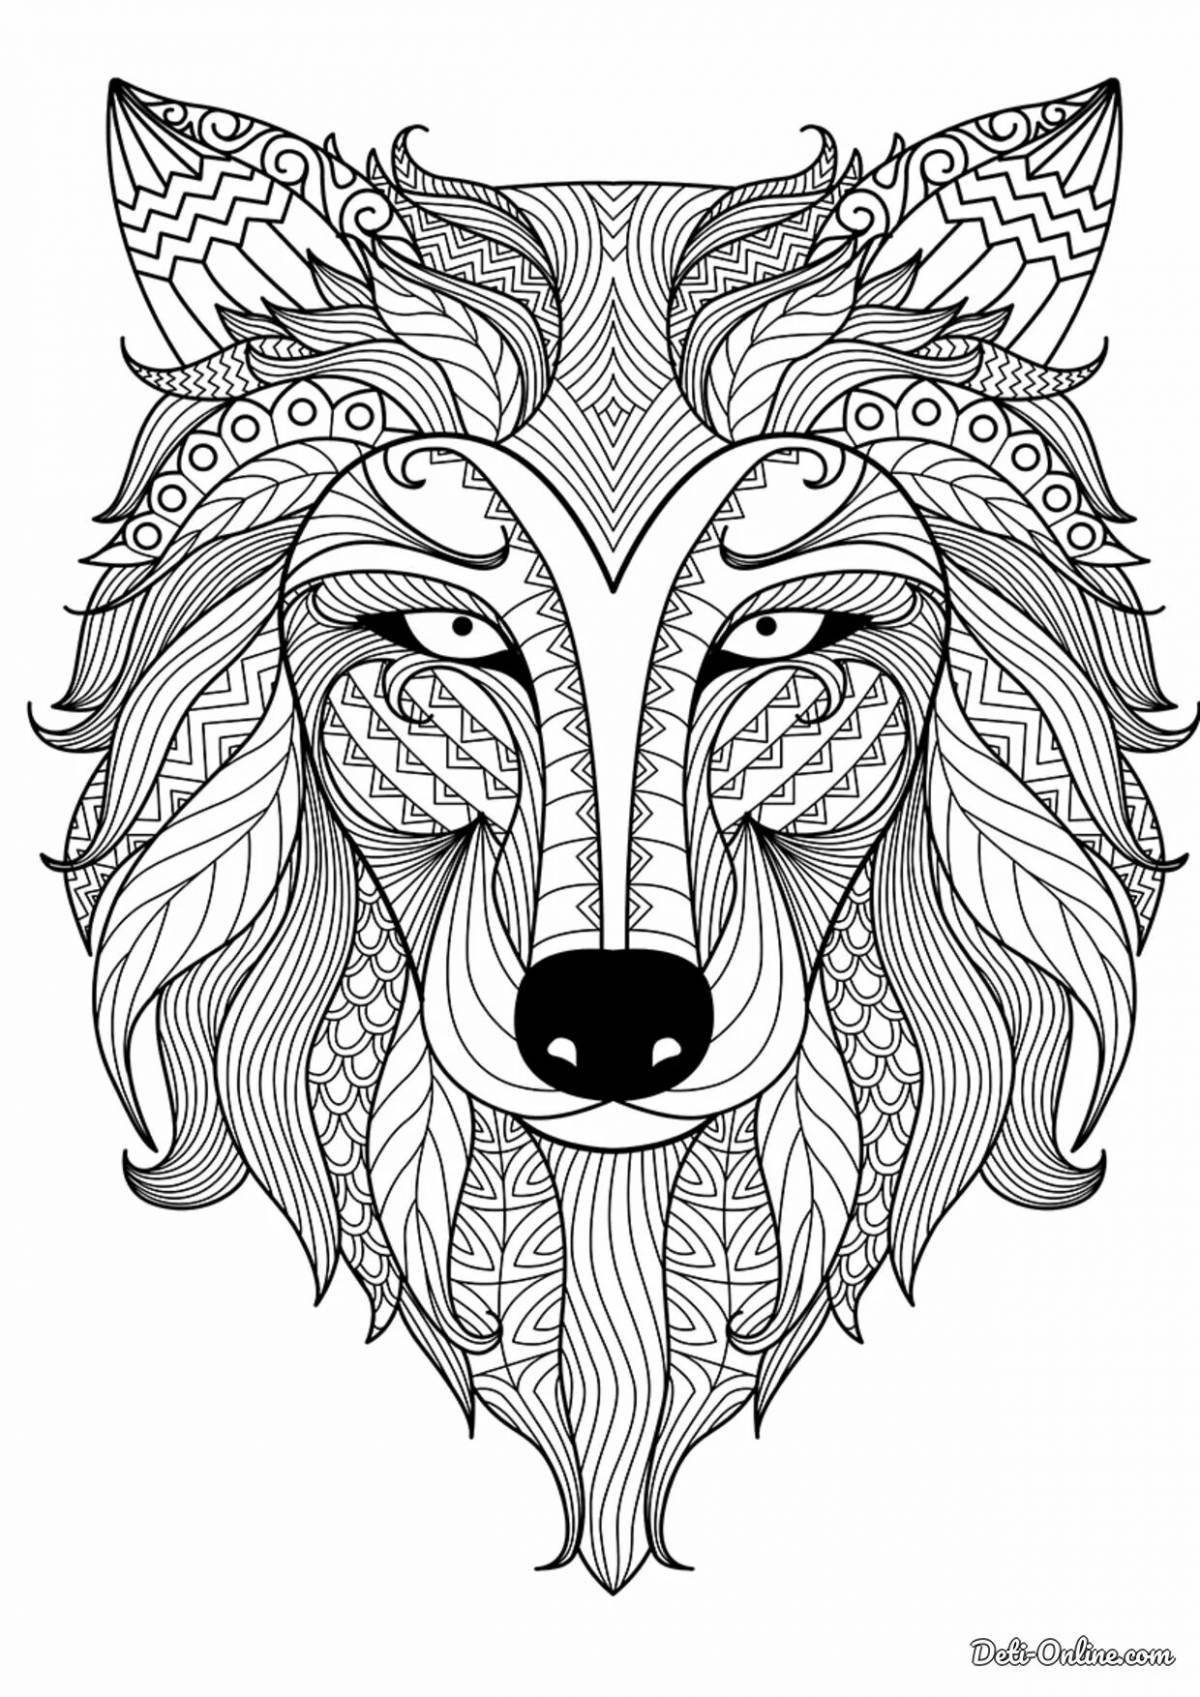 Exquisite antistress wolf coloring book